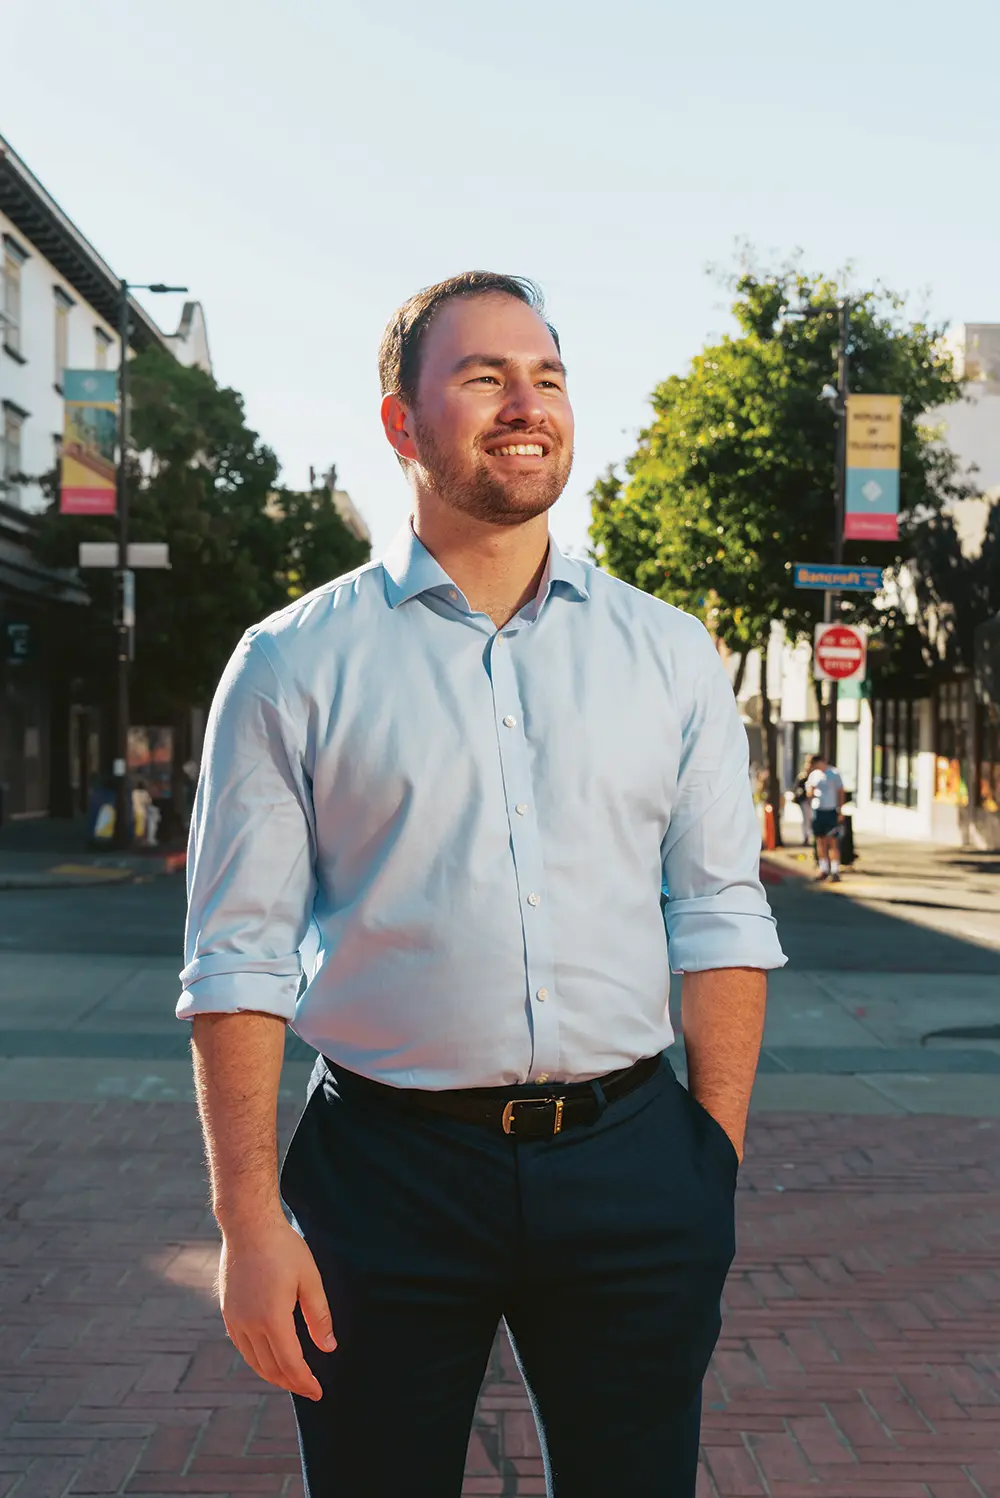 Portrait close-up photograph view of Josh Cayetano smiling in a light sky blue button-up dress shirt and dark navy blue business dress pants as he has his left arm resting inside his left pant pocket while the other right arm is freely resting in the air while he stands somewhere out in town at an intersection area during the day